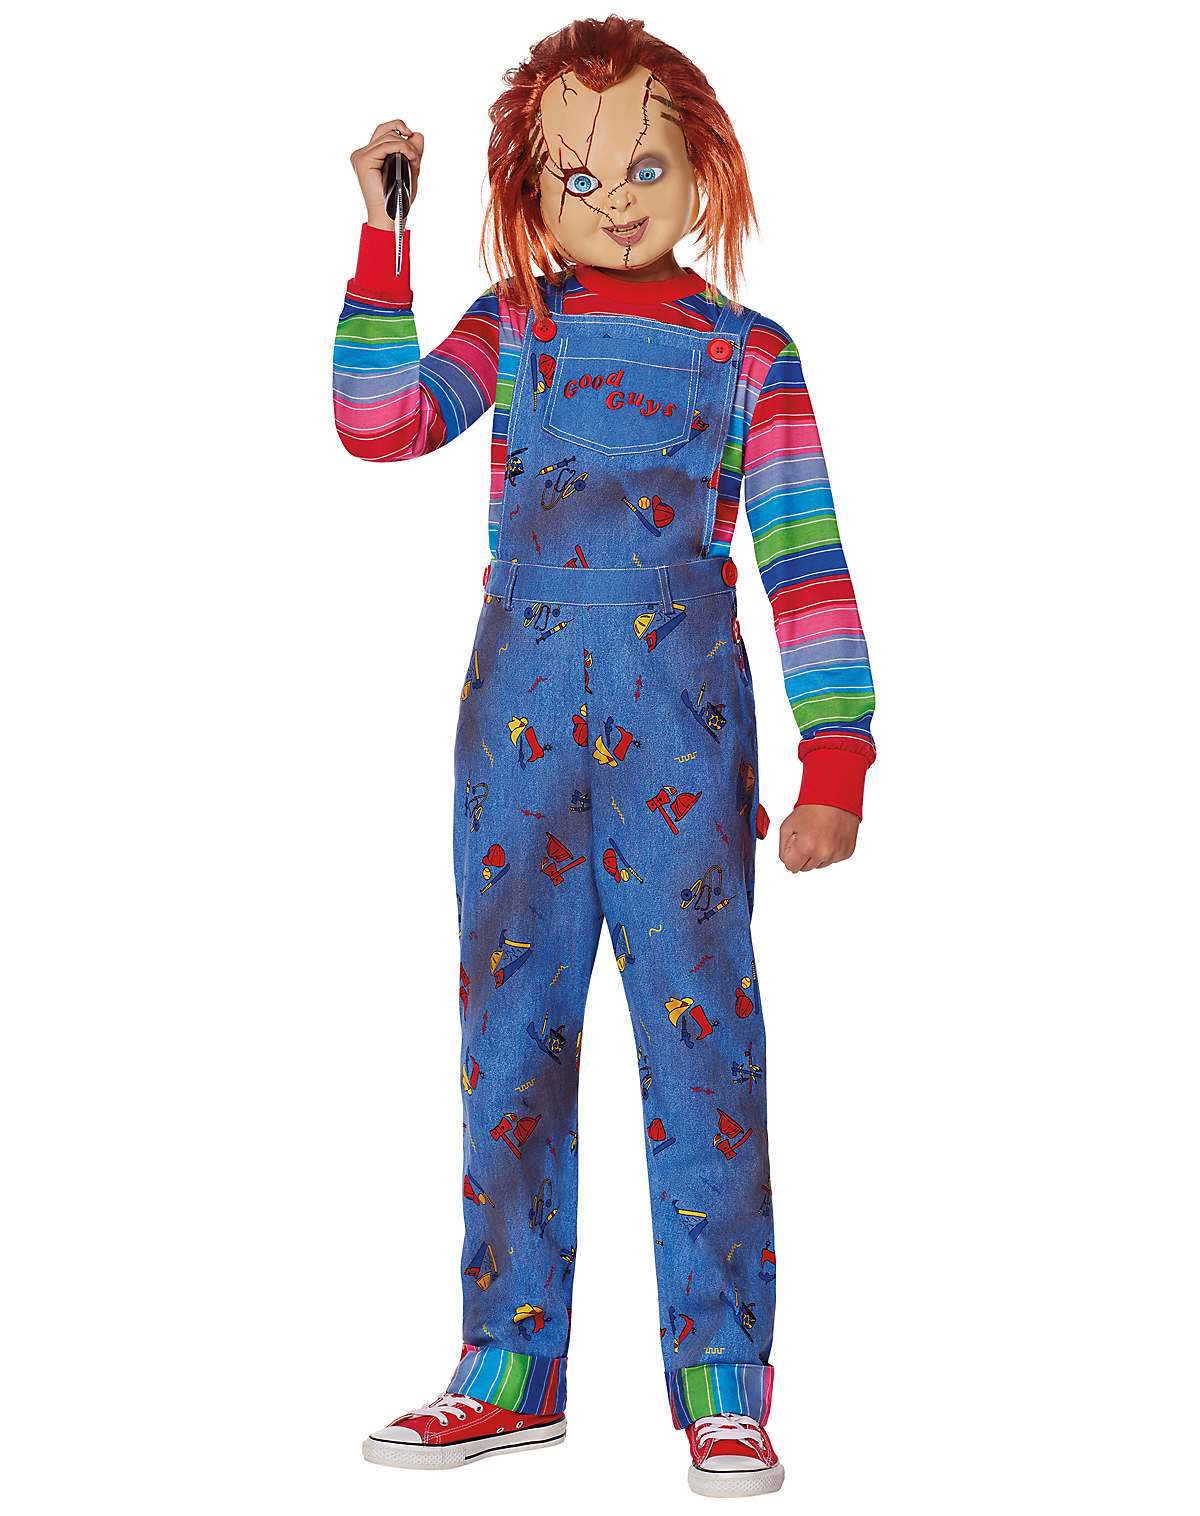 Kids Chucky Costume - The Signature Collection